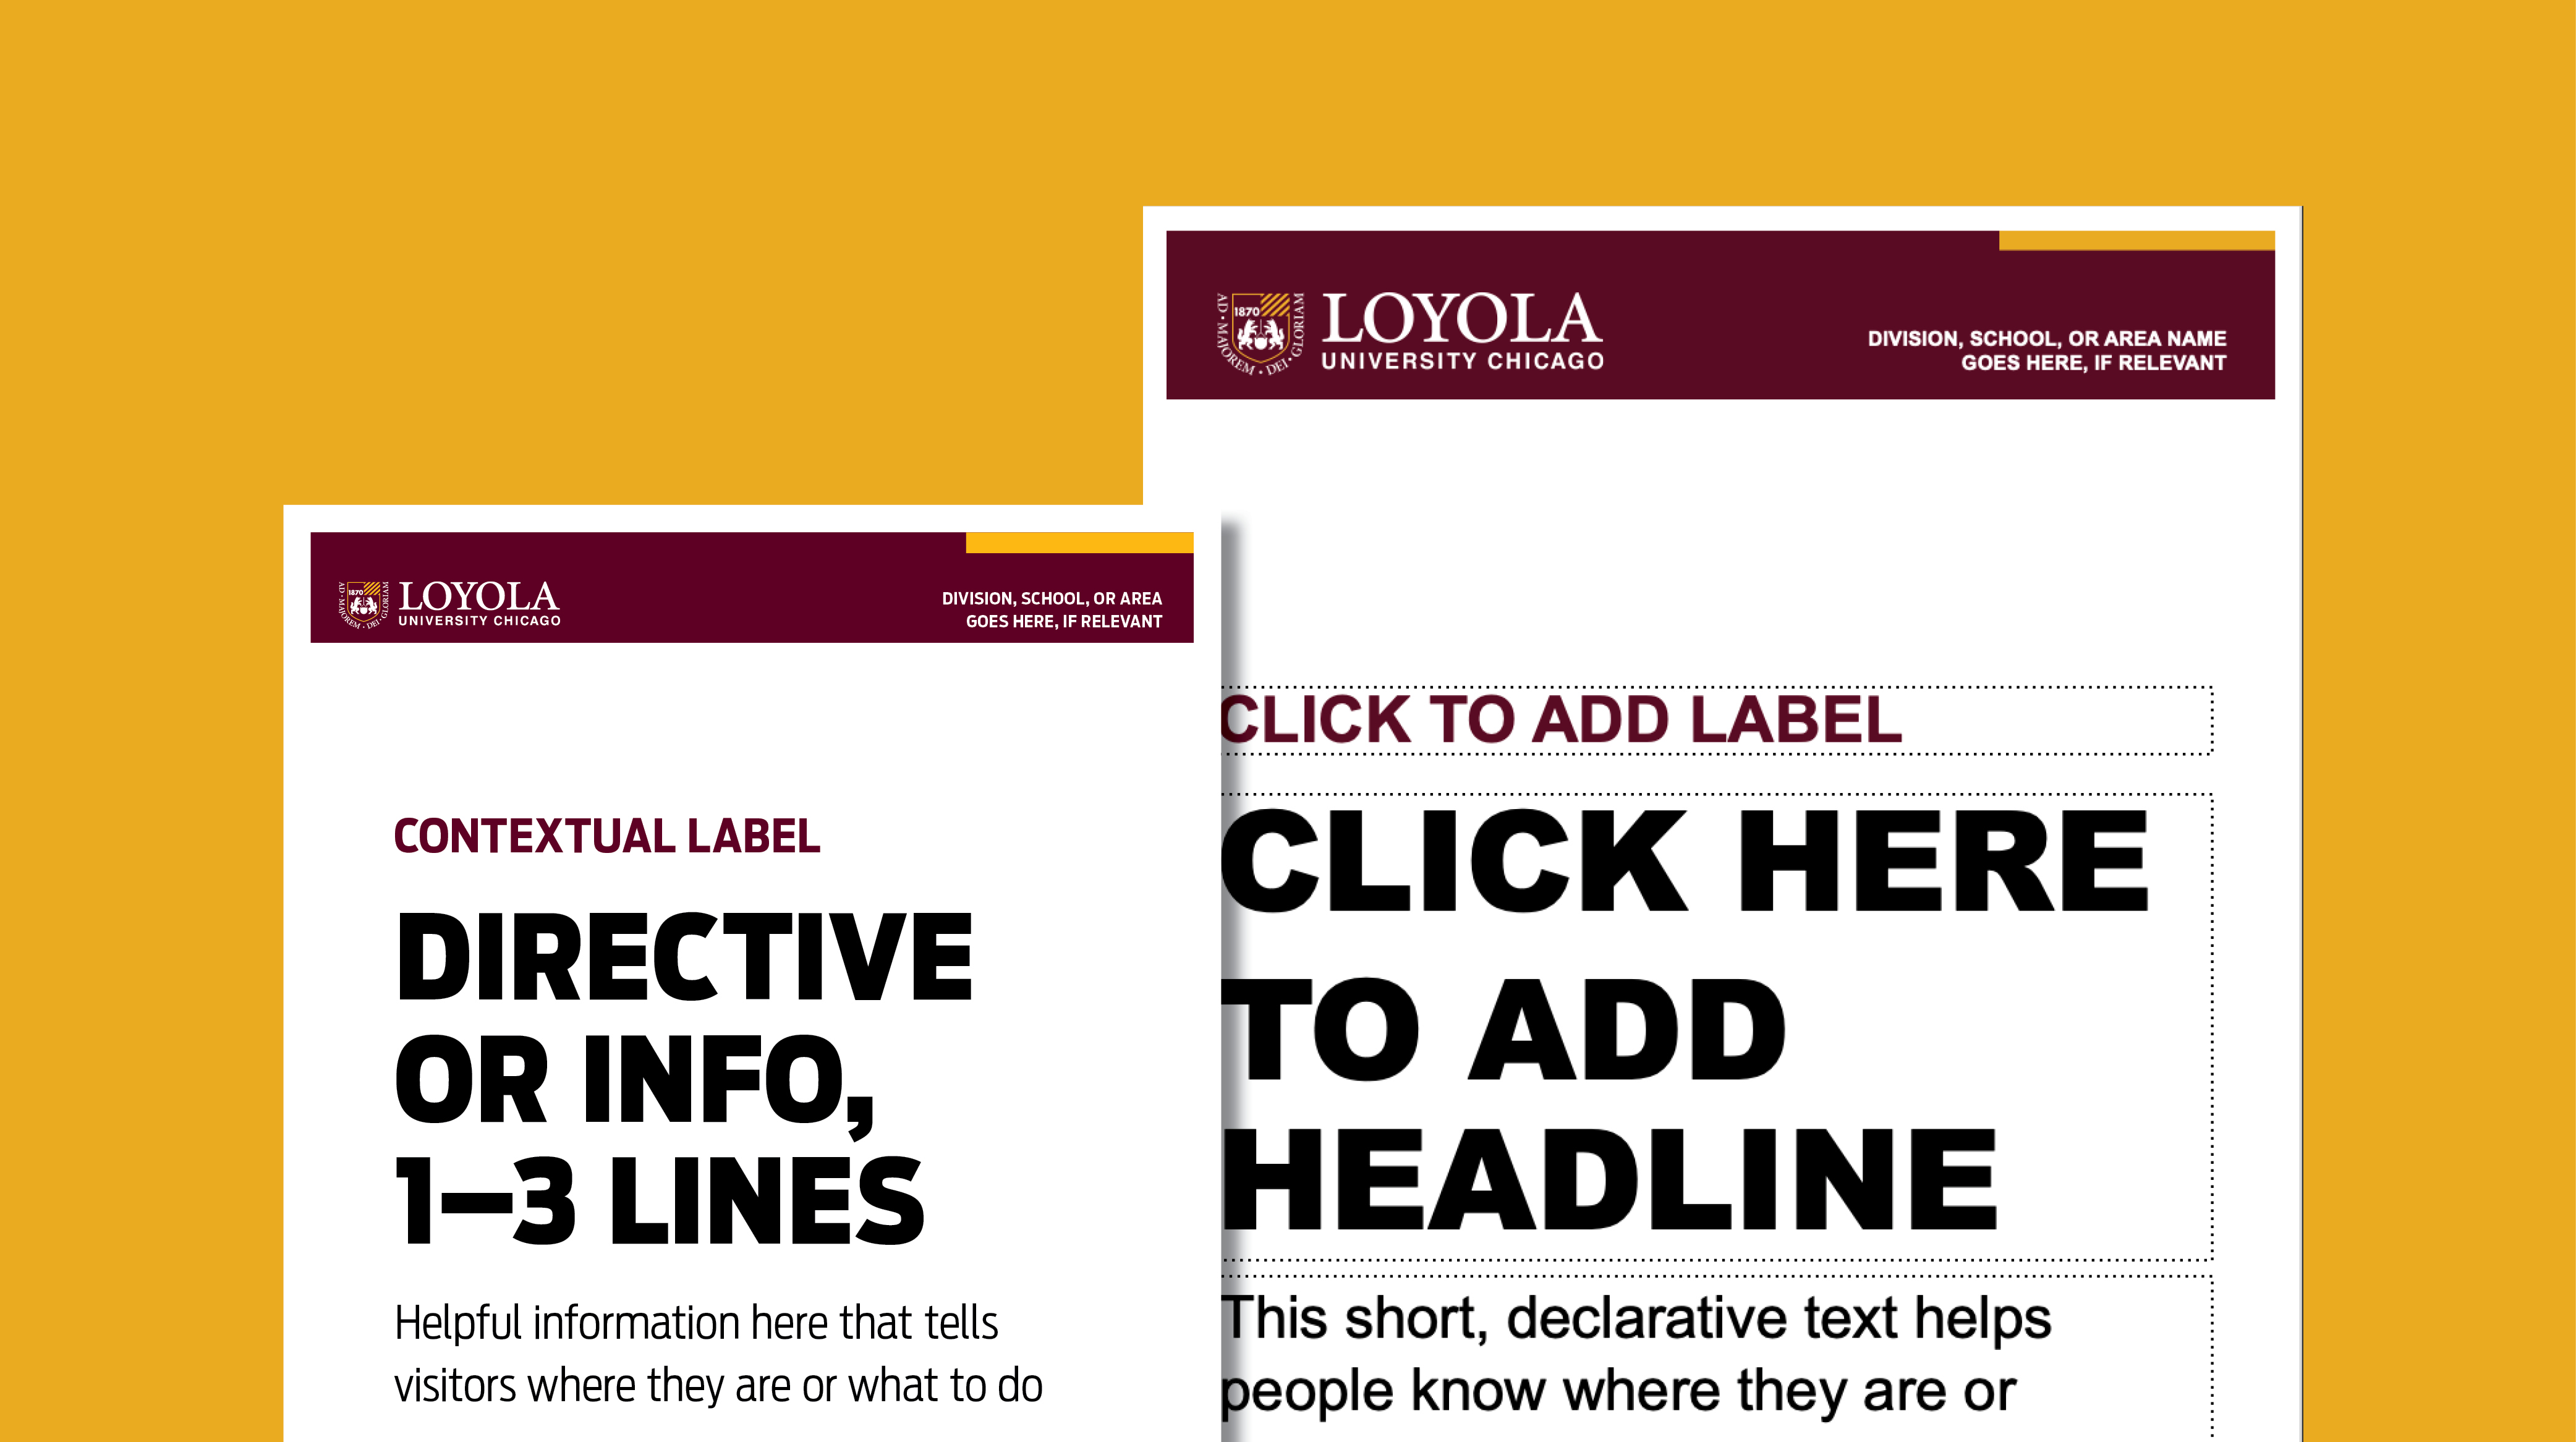 Simple signage example has a maroon bar at the top, followed by placeholder text in various sizes, all in Loyola Chicago brand fonts and colors.